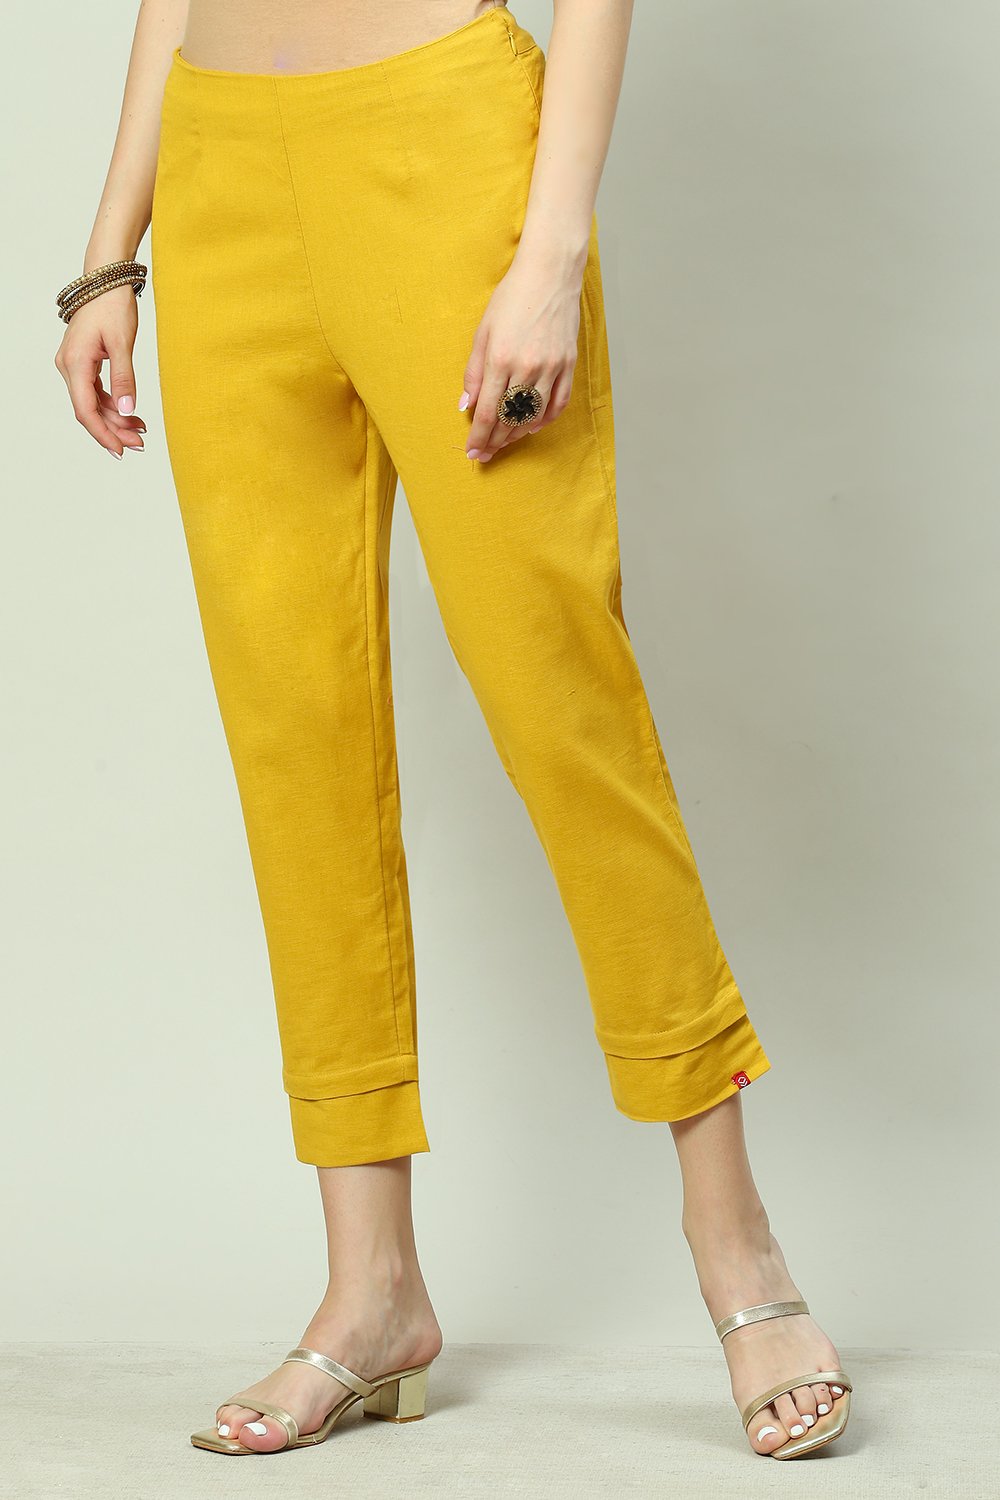 Buy Ochre Cotton Flax Slim Pants (Pants) for INR599.00